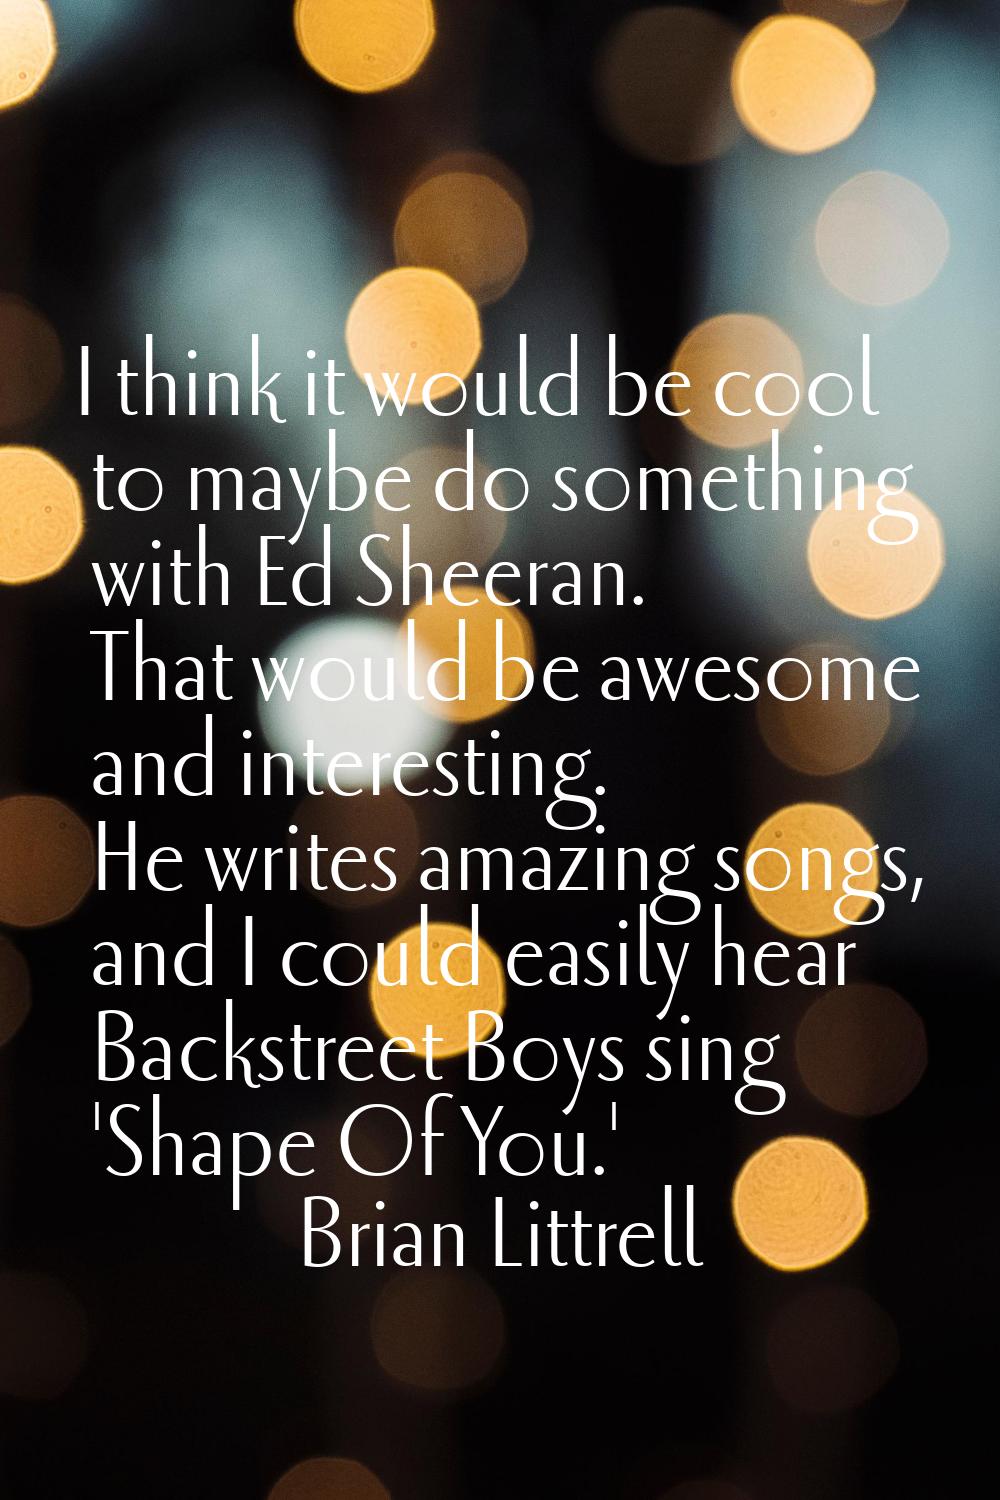 I think it would be cool to maybe do something with Ed Sheeran. That would be awesome and interesti